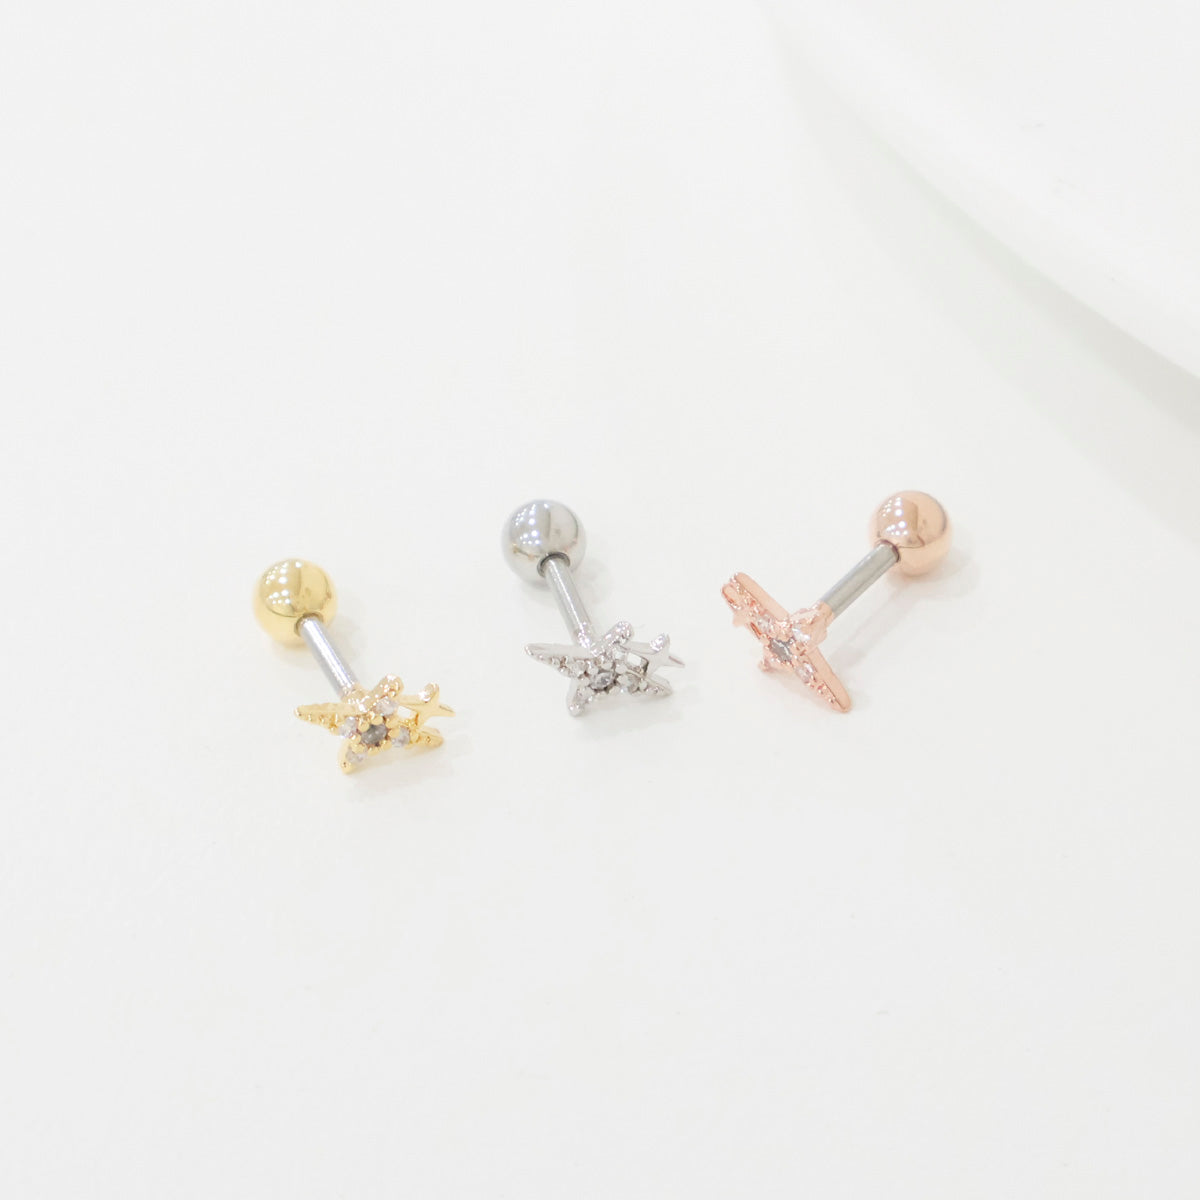 Cubic crystal setting Sparkling Bling-Bling Glitter Surgical Steel piercing tiny ear Helix Piercing screw back ball ,Cartilage Piercing,Tragus Ear Jewelry Body Accessories